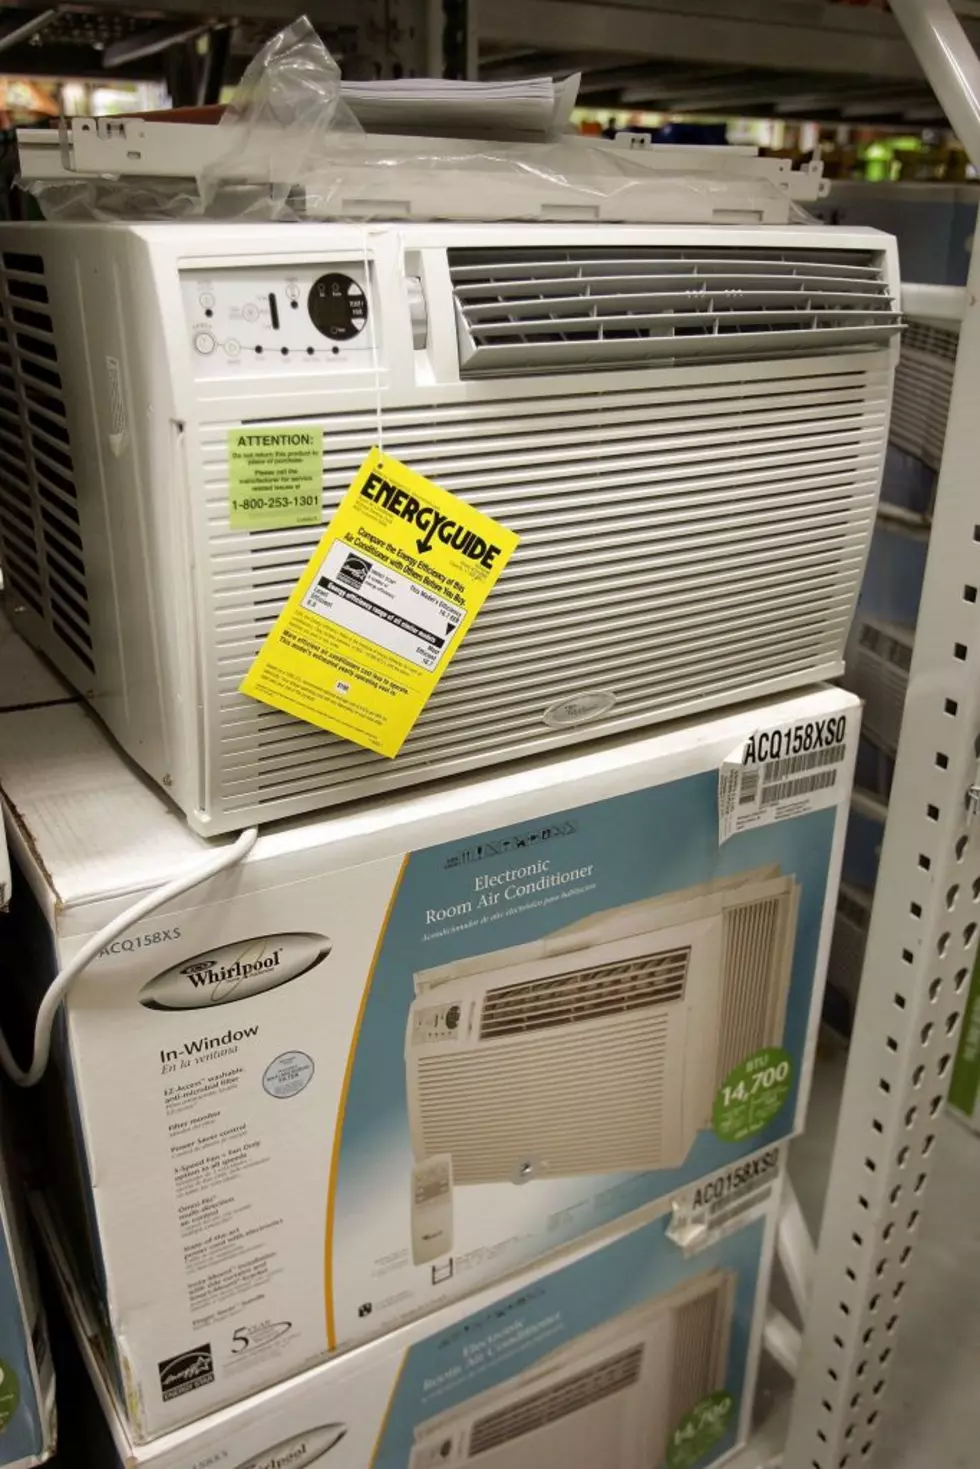 Get a Free Air Conditioner For Summer